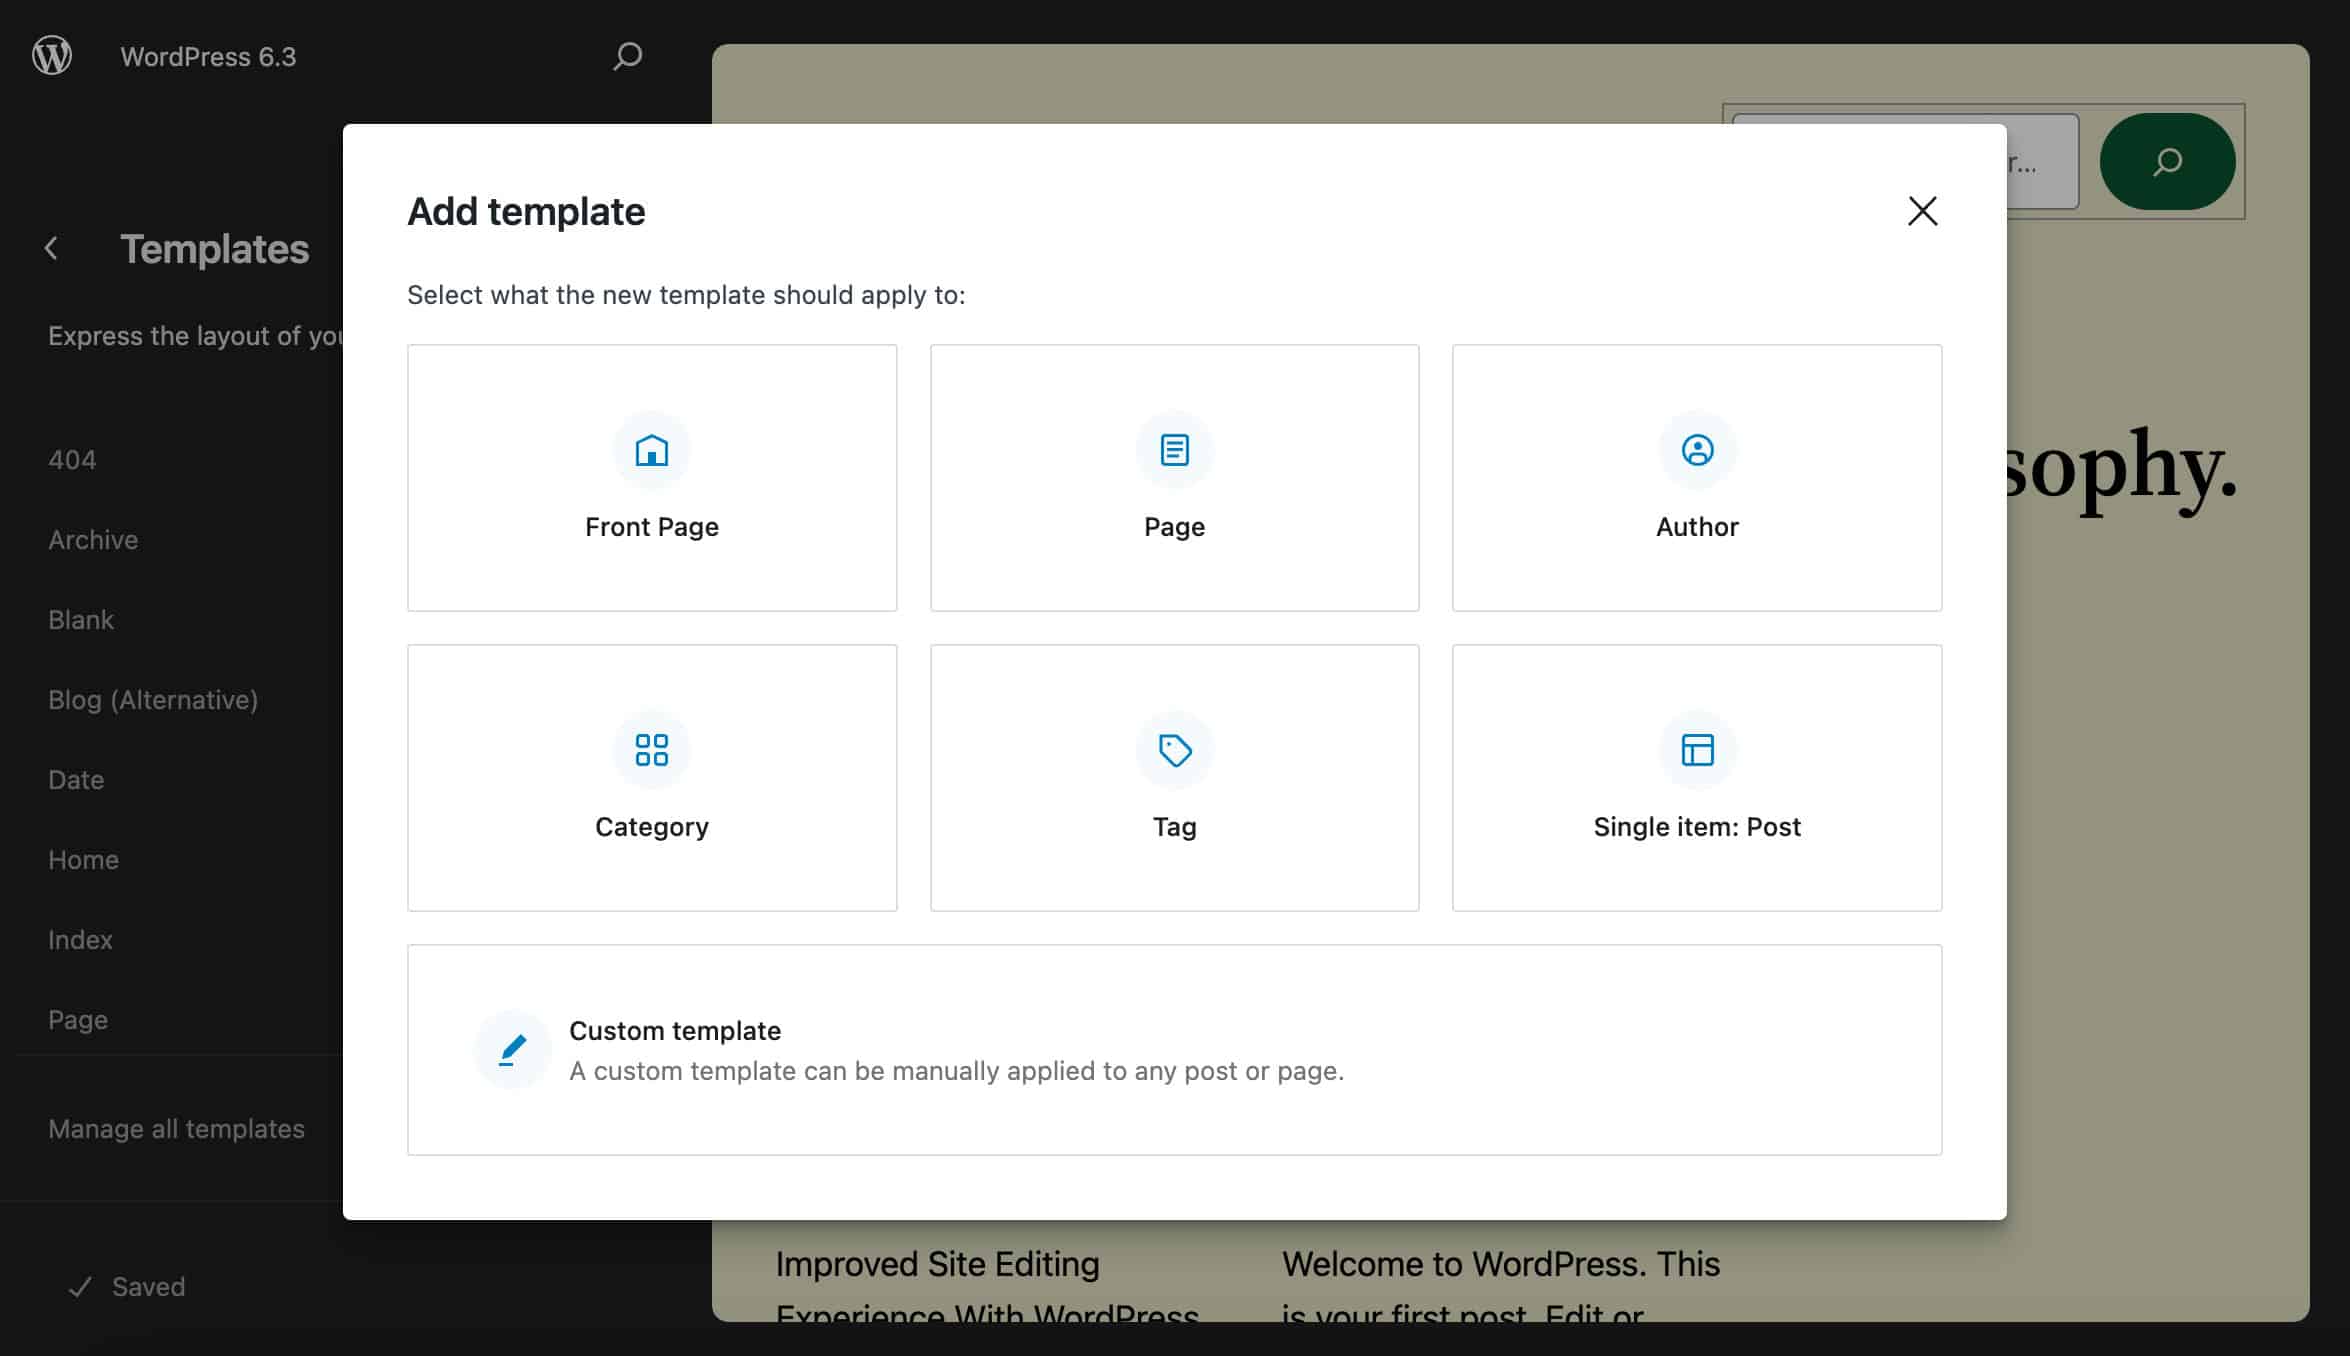 A new modal provides a list of default pages to choose from when creating a new template